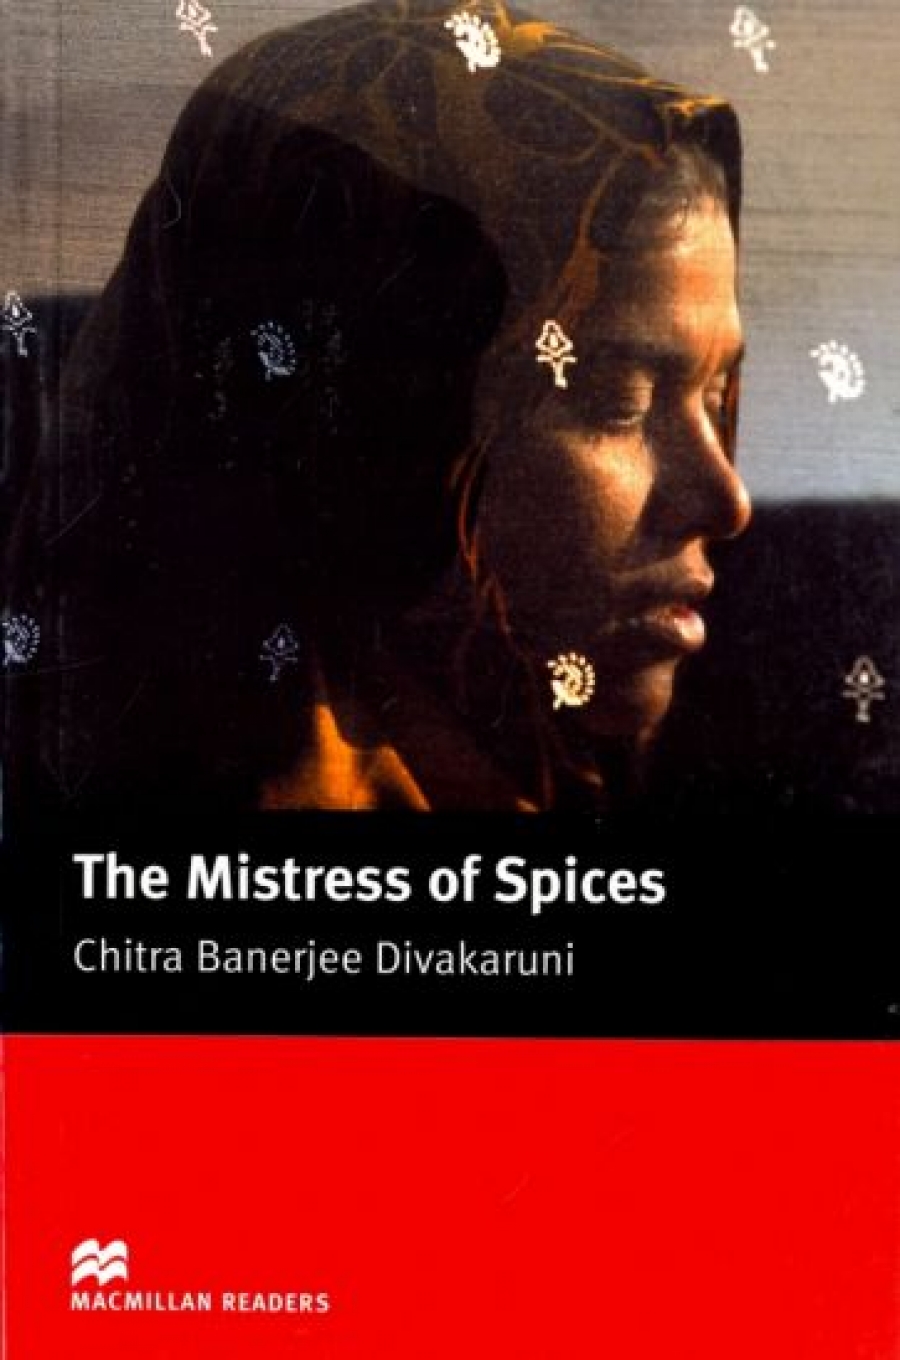 retold by Anne Collins, Chitra Banerjee Divakaruni The Mistress of Spices 